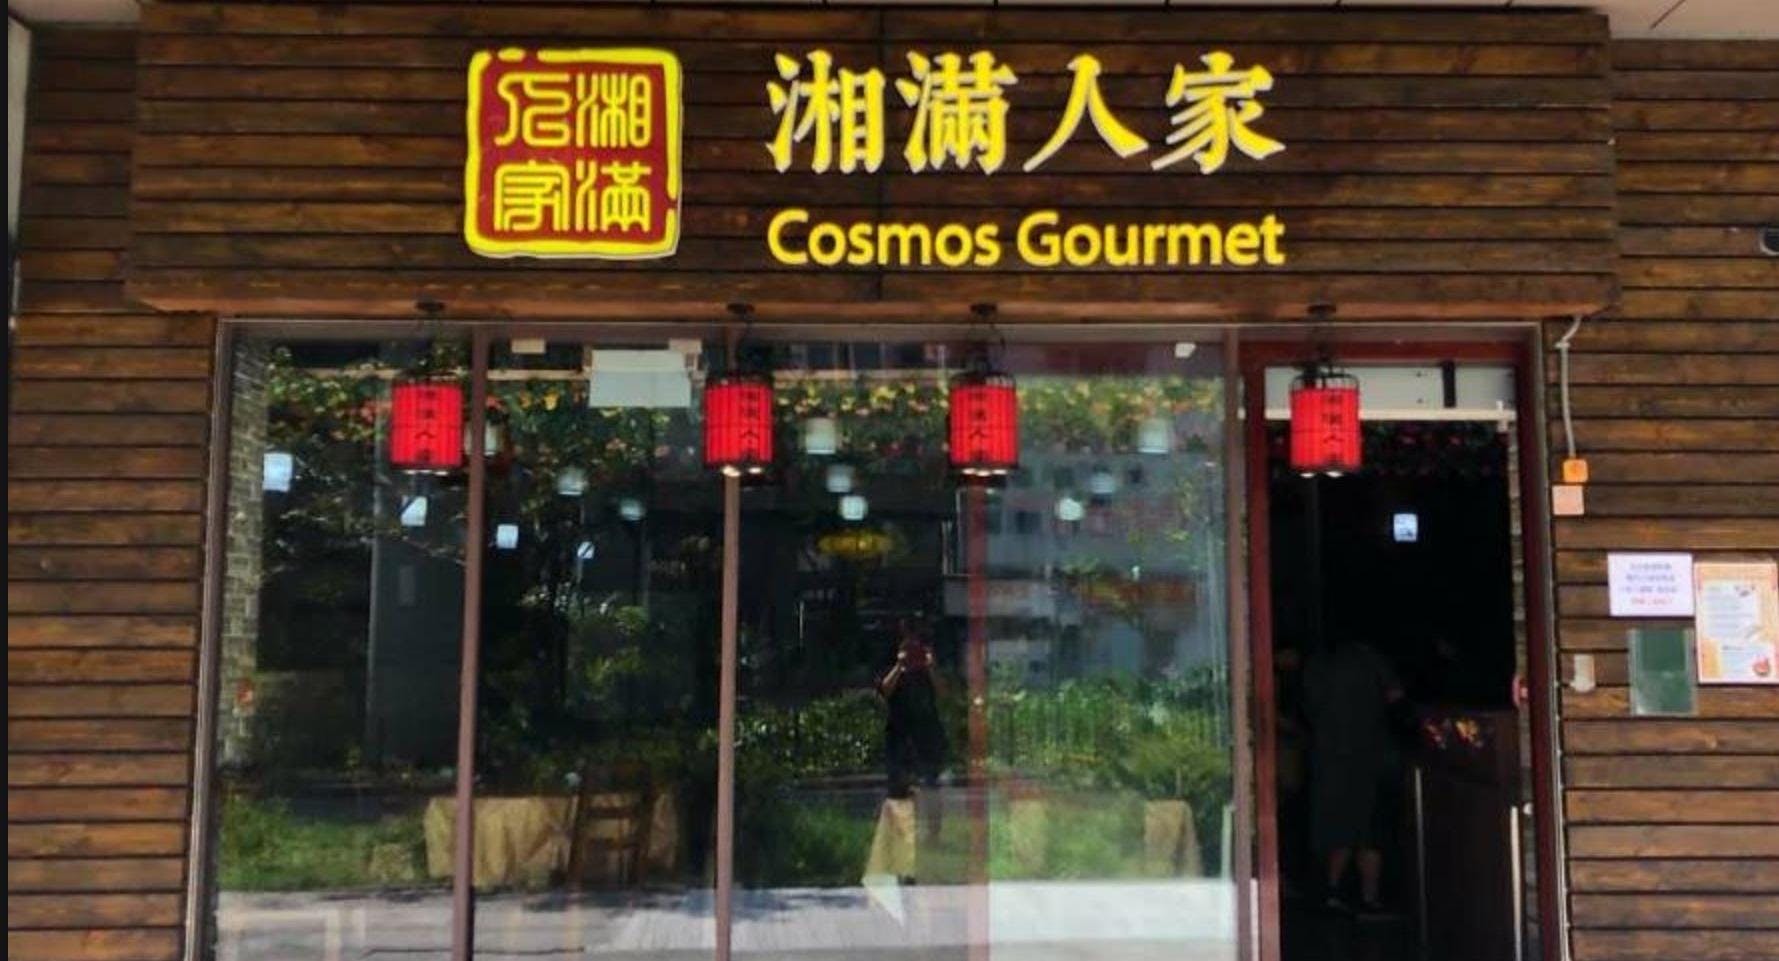 Photo of restaurant Cosmos Gourmet  湘滿人家 in Ma On Shan, Hong Kong